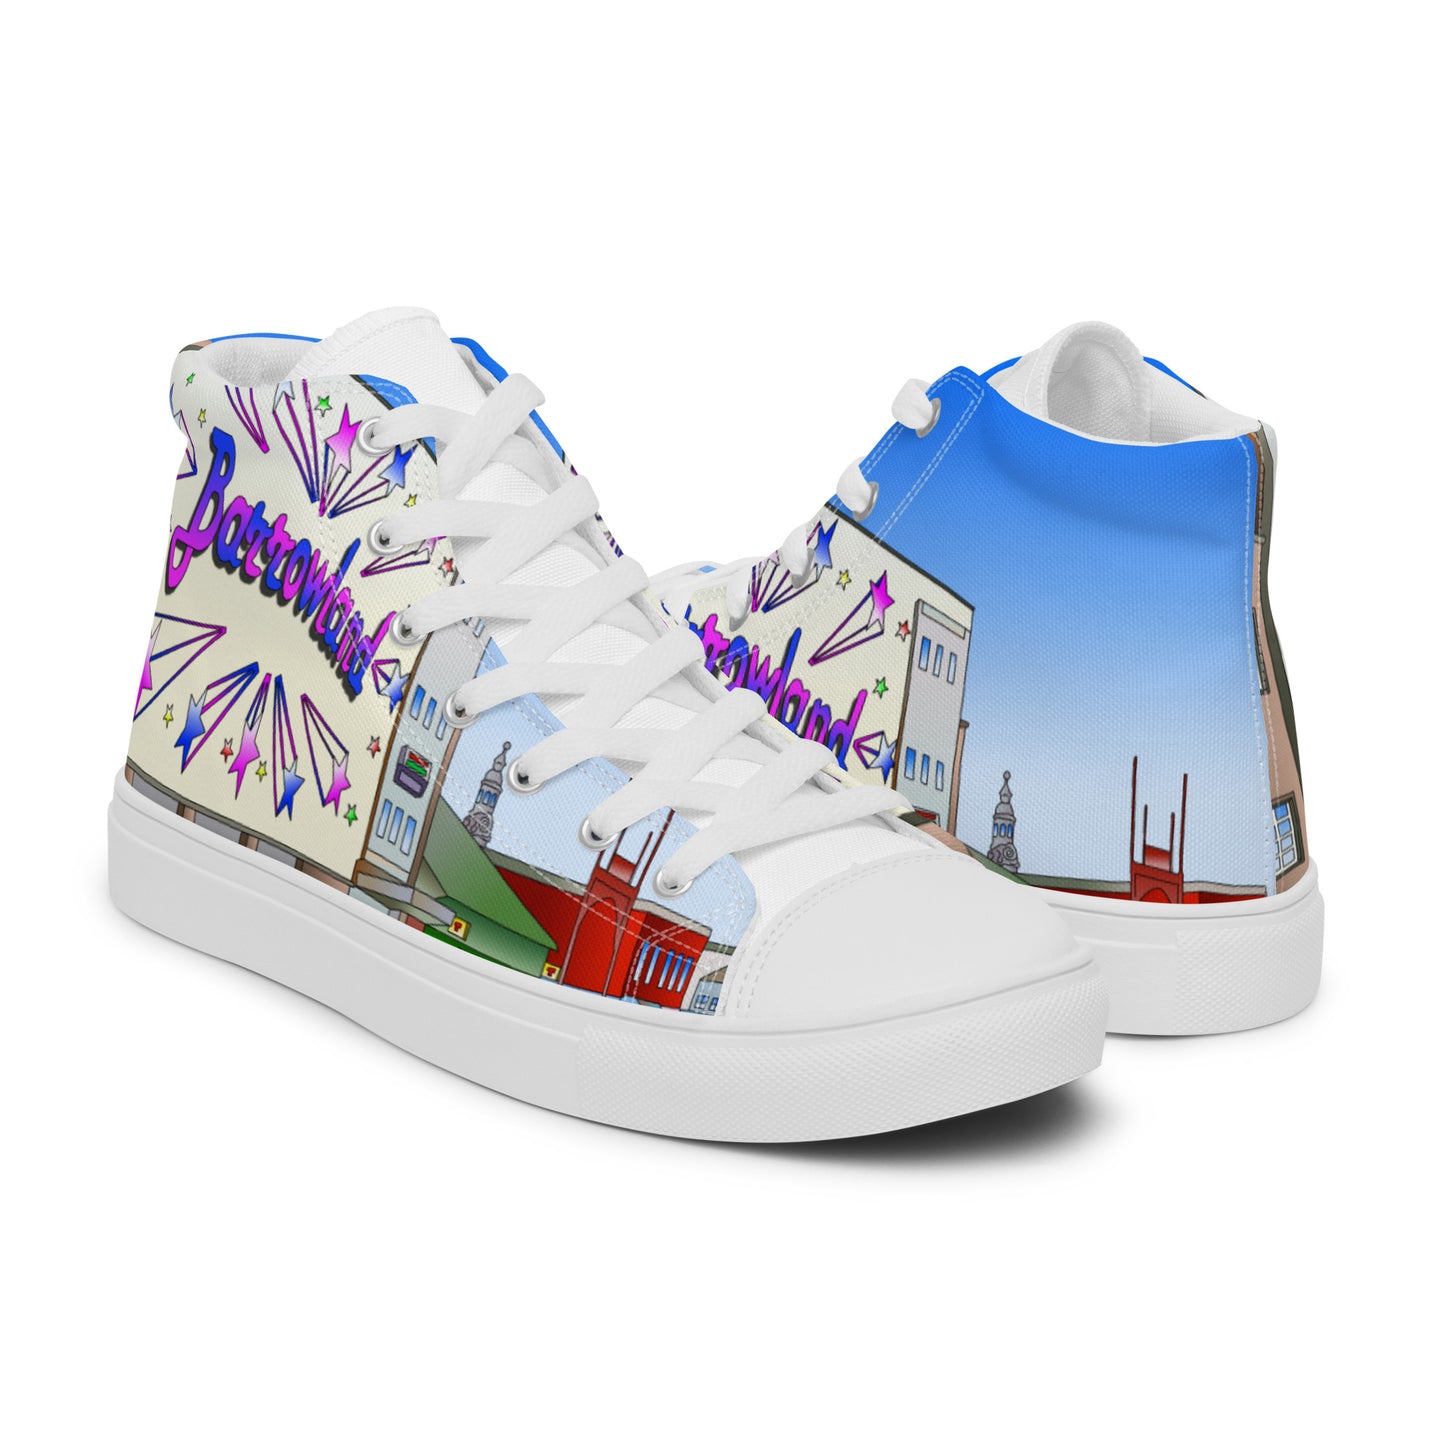 The Barrowlands Glasgow Women’s high top canvas shoes